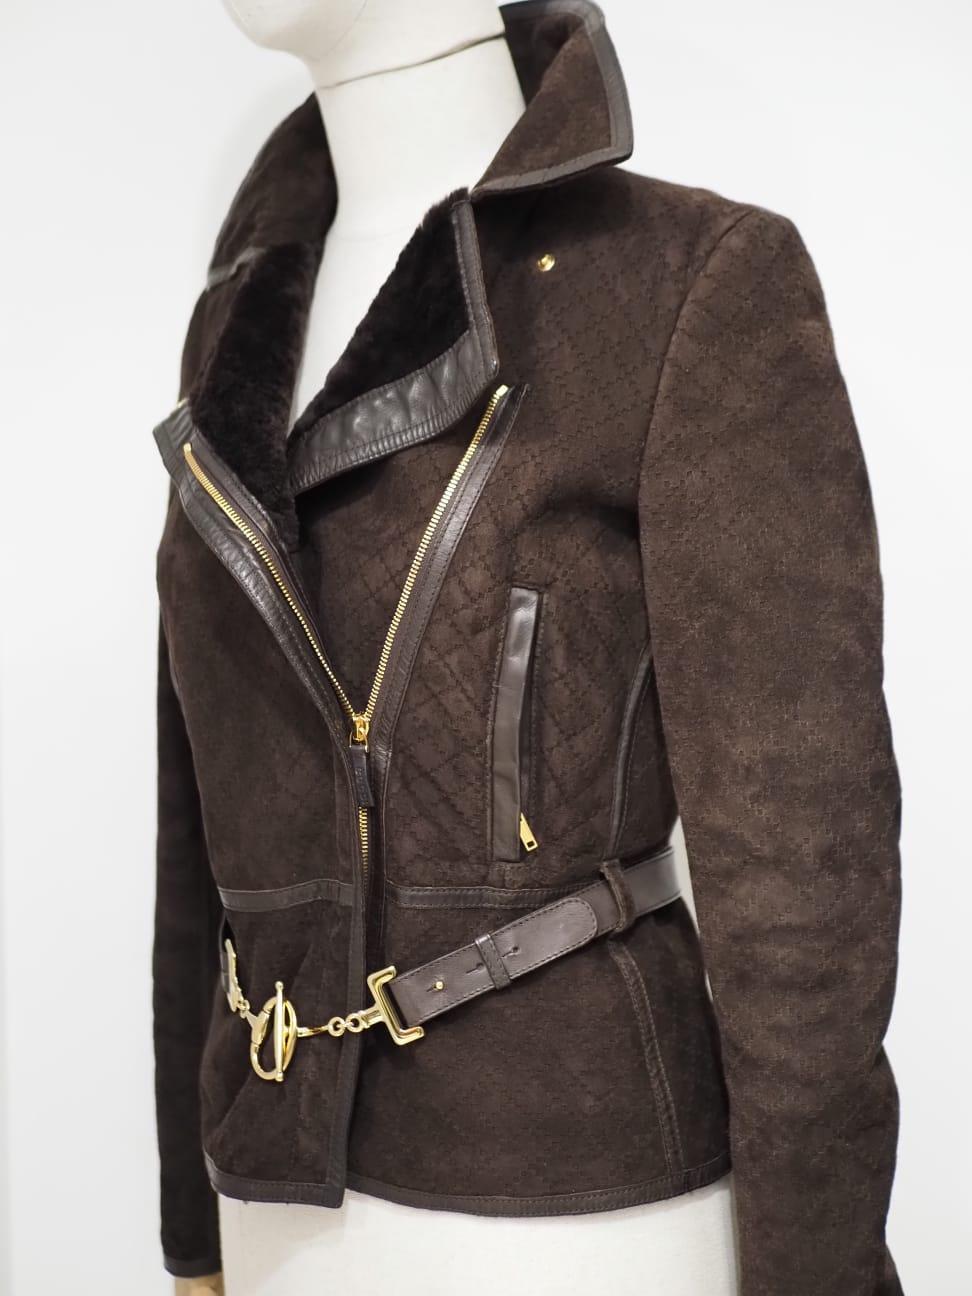 Gucci Brown shearling lamb fur jacket
Totally made in Italy in size 38
Embellished with Gold tone hardware 